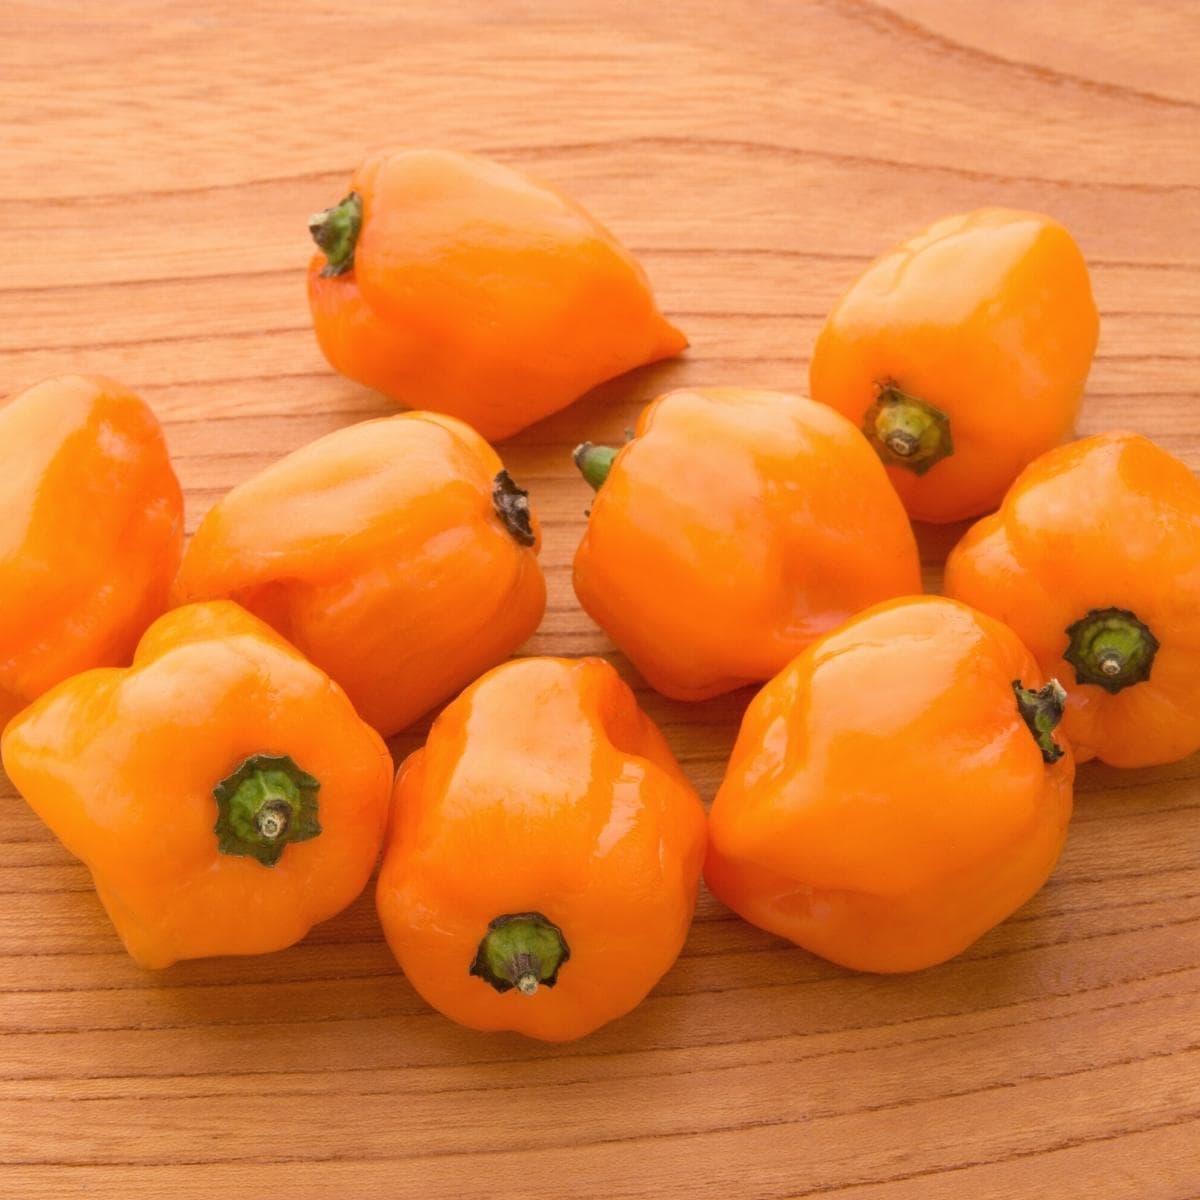 Orange habanero peppers resting on a wooden table.